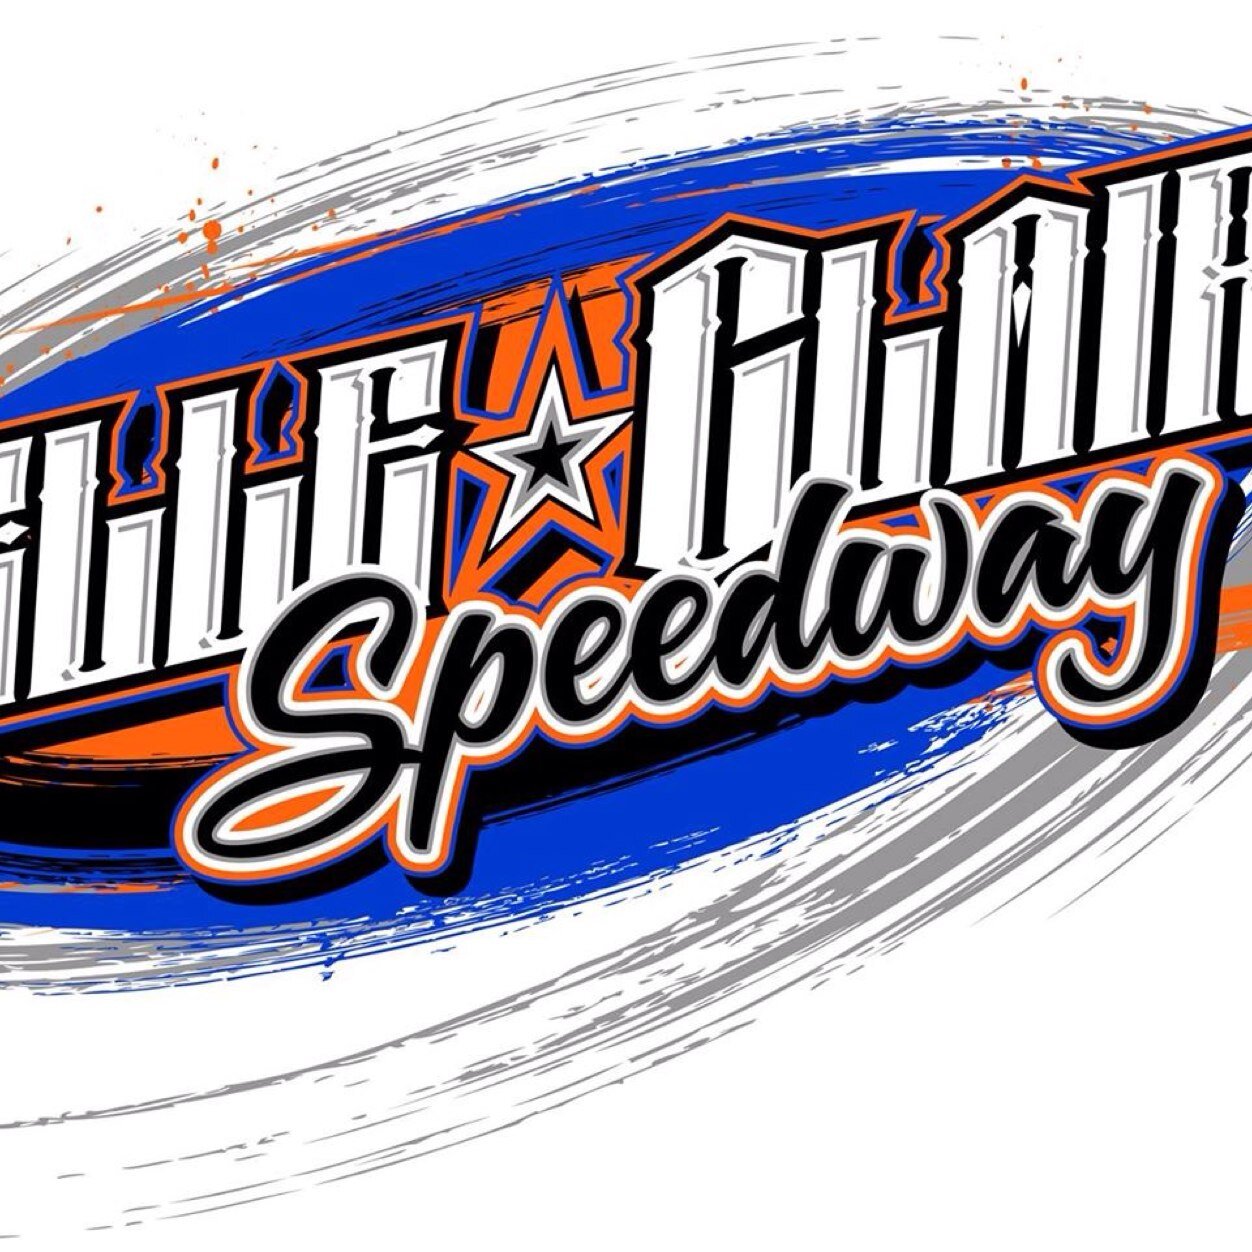 Belle-Clair Speedway is a Historic 1/5th mile banked oval dirt track located on Belle-Clair Fairgrounds.